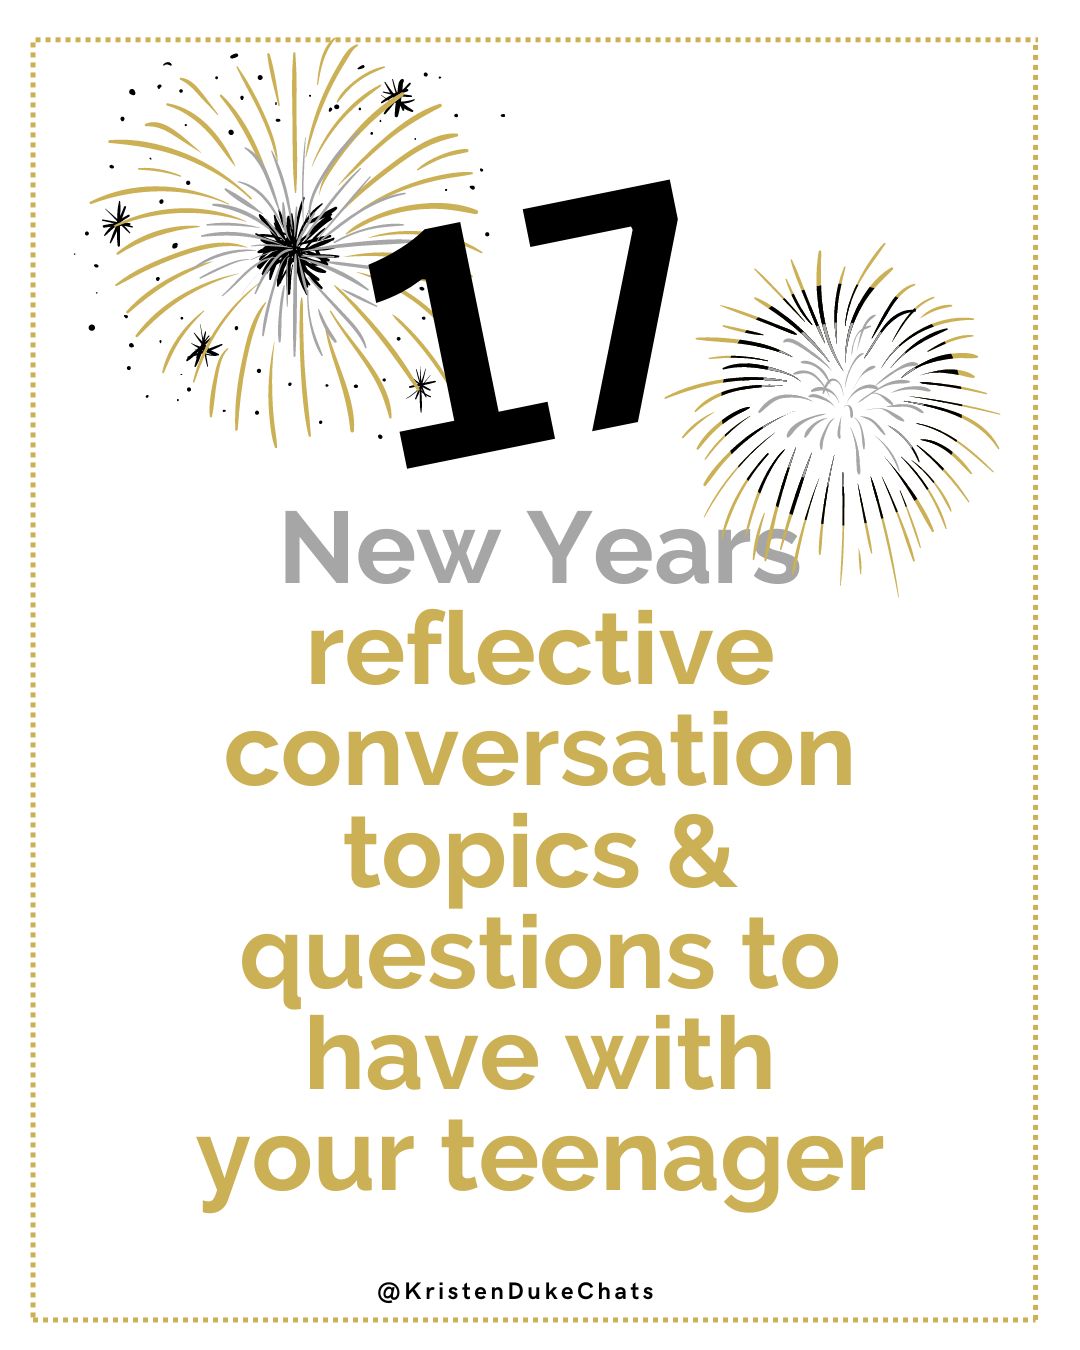 New Years conversation topics and questions to have with your teenager